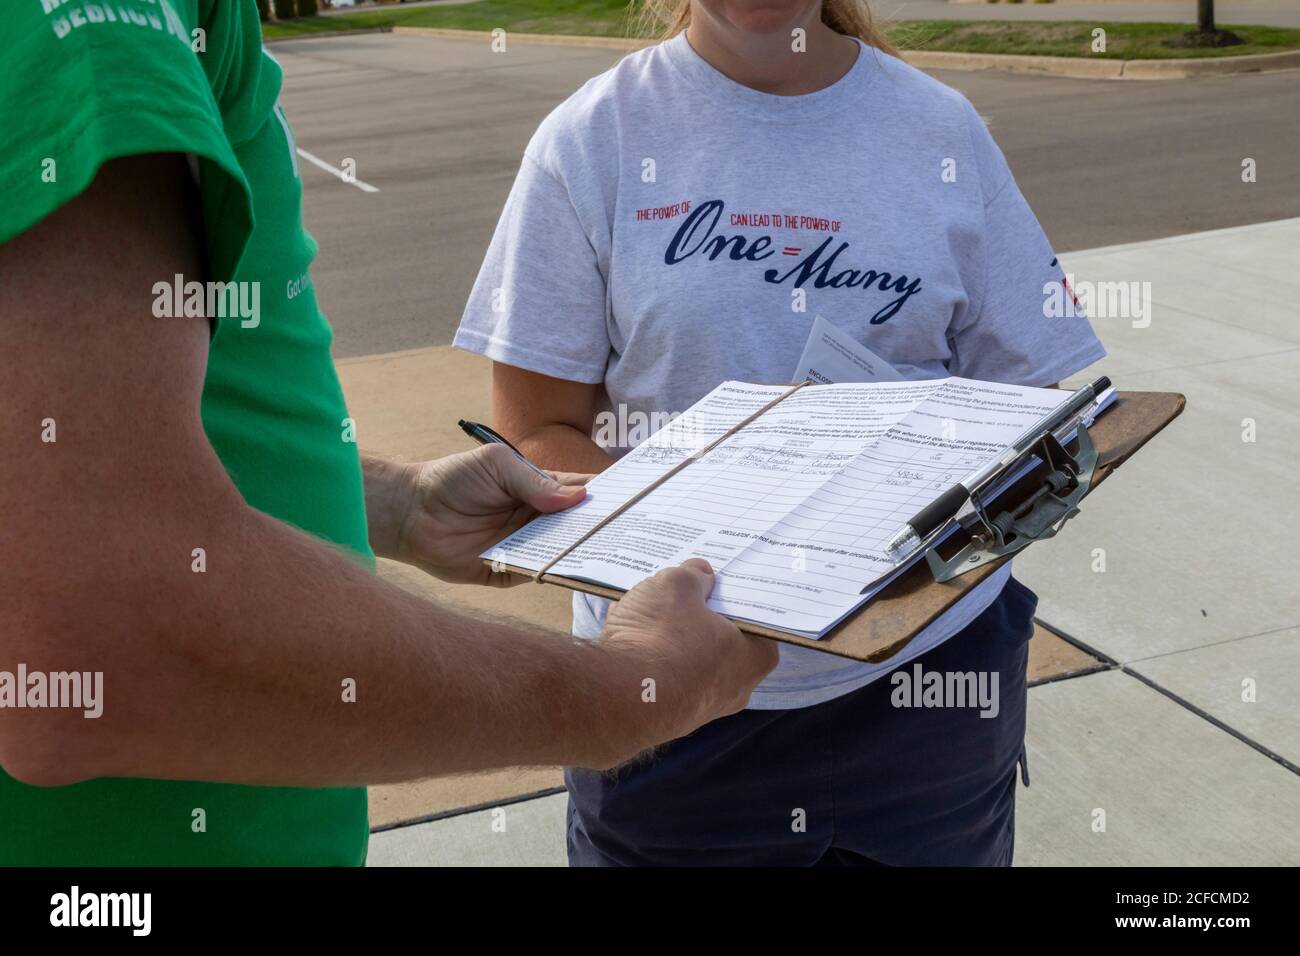 Clinton Township, Michigan, USA. 4th Sep, 2020. People in Michigan's Macomb County sign petitions aiming to repeal the emergency power act that Governor Gretchen Whitmer has used to close businesses and require mask wearing during the coronavirus pandemic. The 'Unlock Michigan' campaign is backed by prominent Republican leaders. Credit: Jim West/Alamy Live News Stock Photo